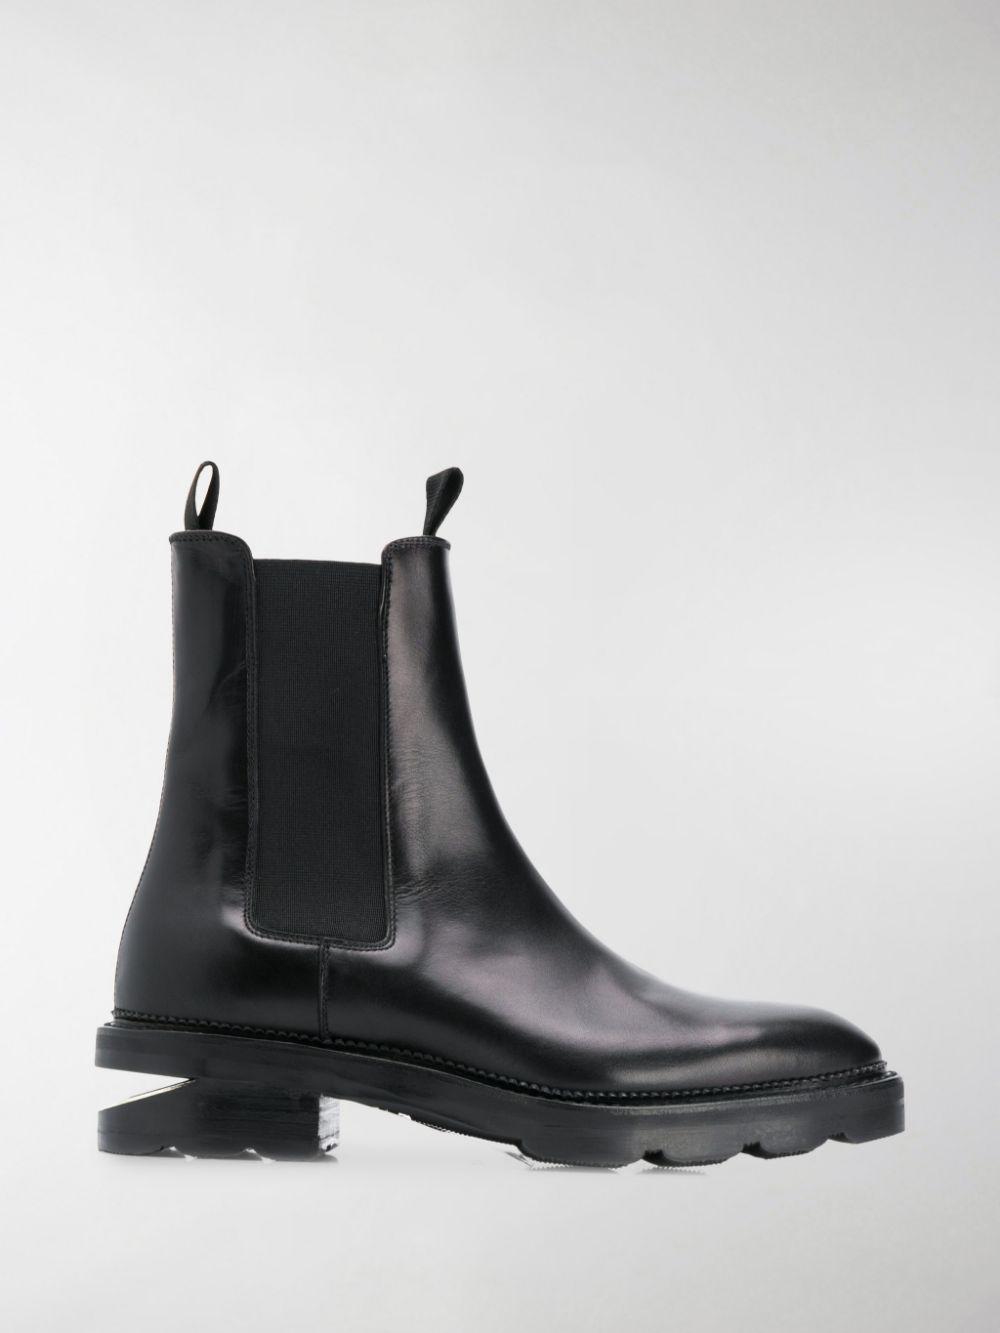 Alexander Wang Elasticated Side Panel Boots in Black - Lyst